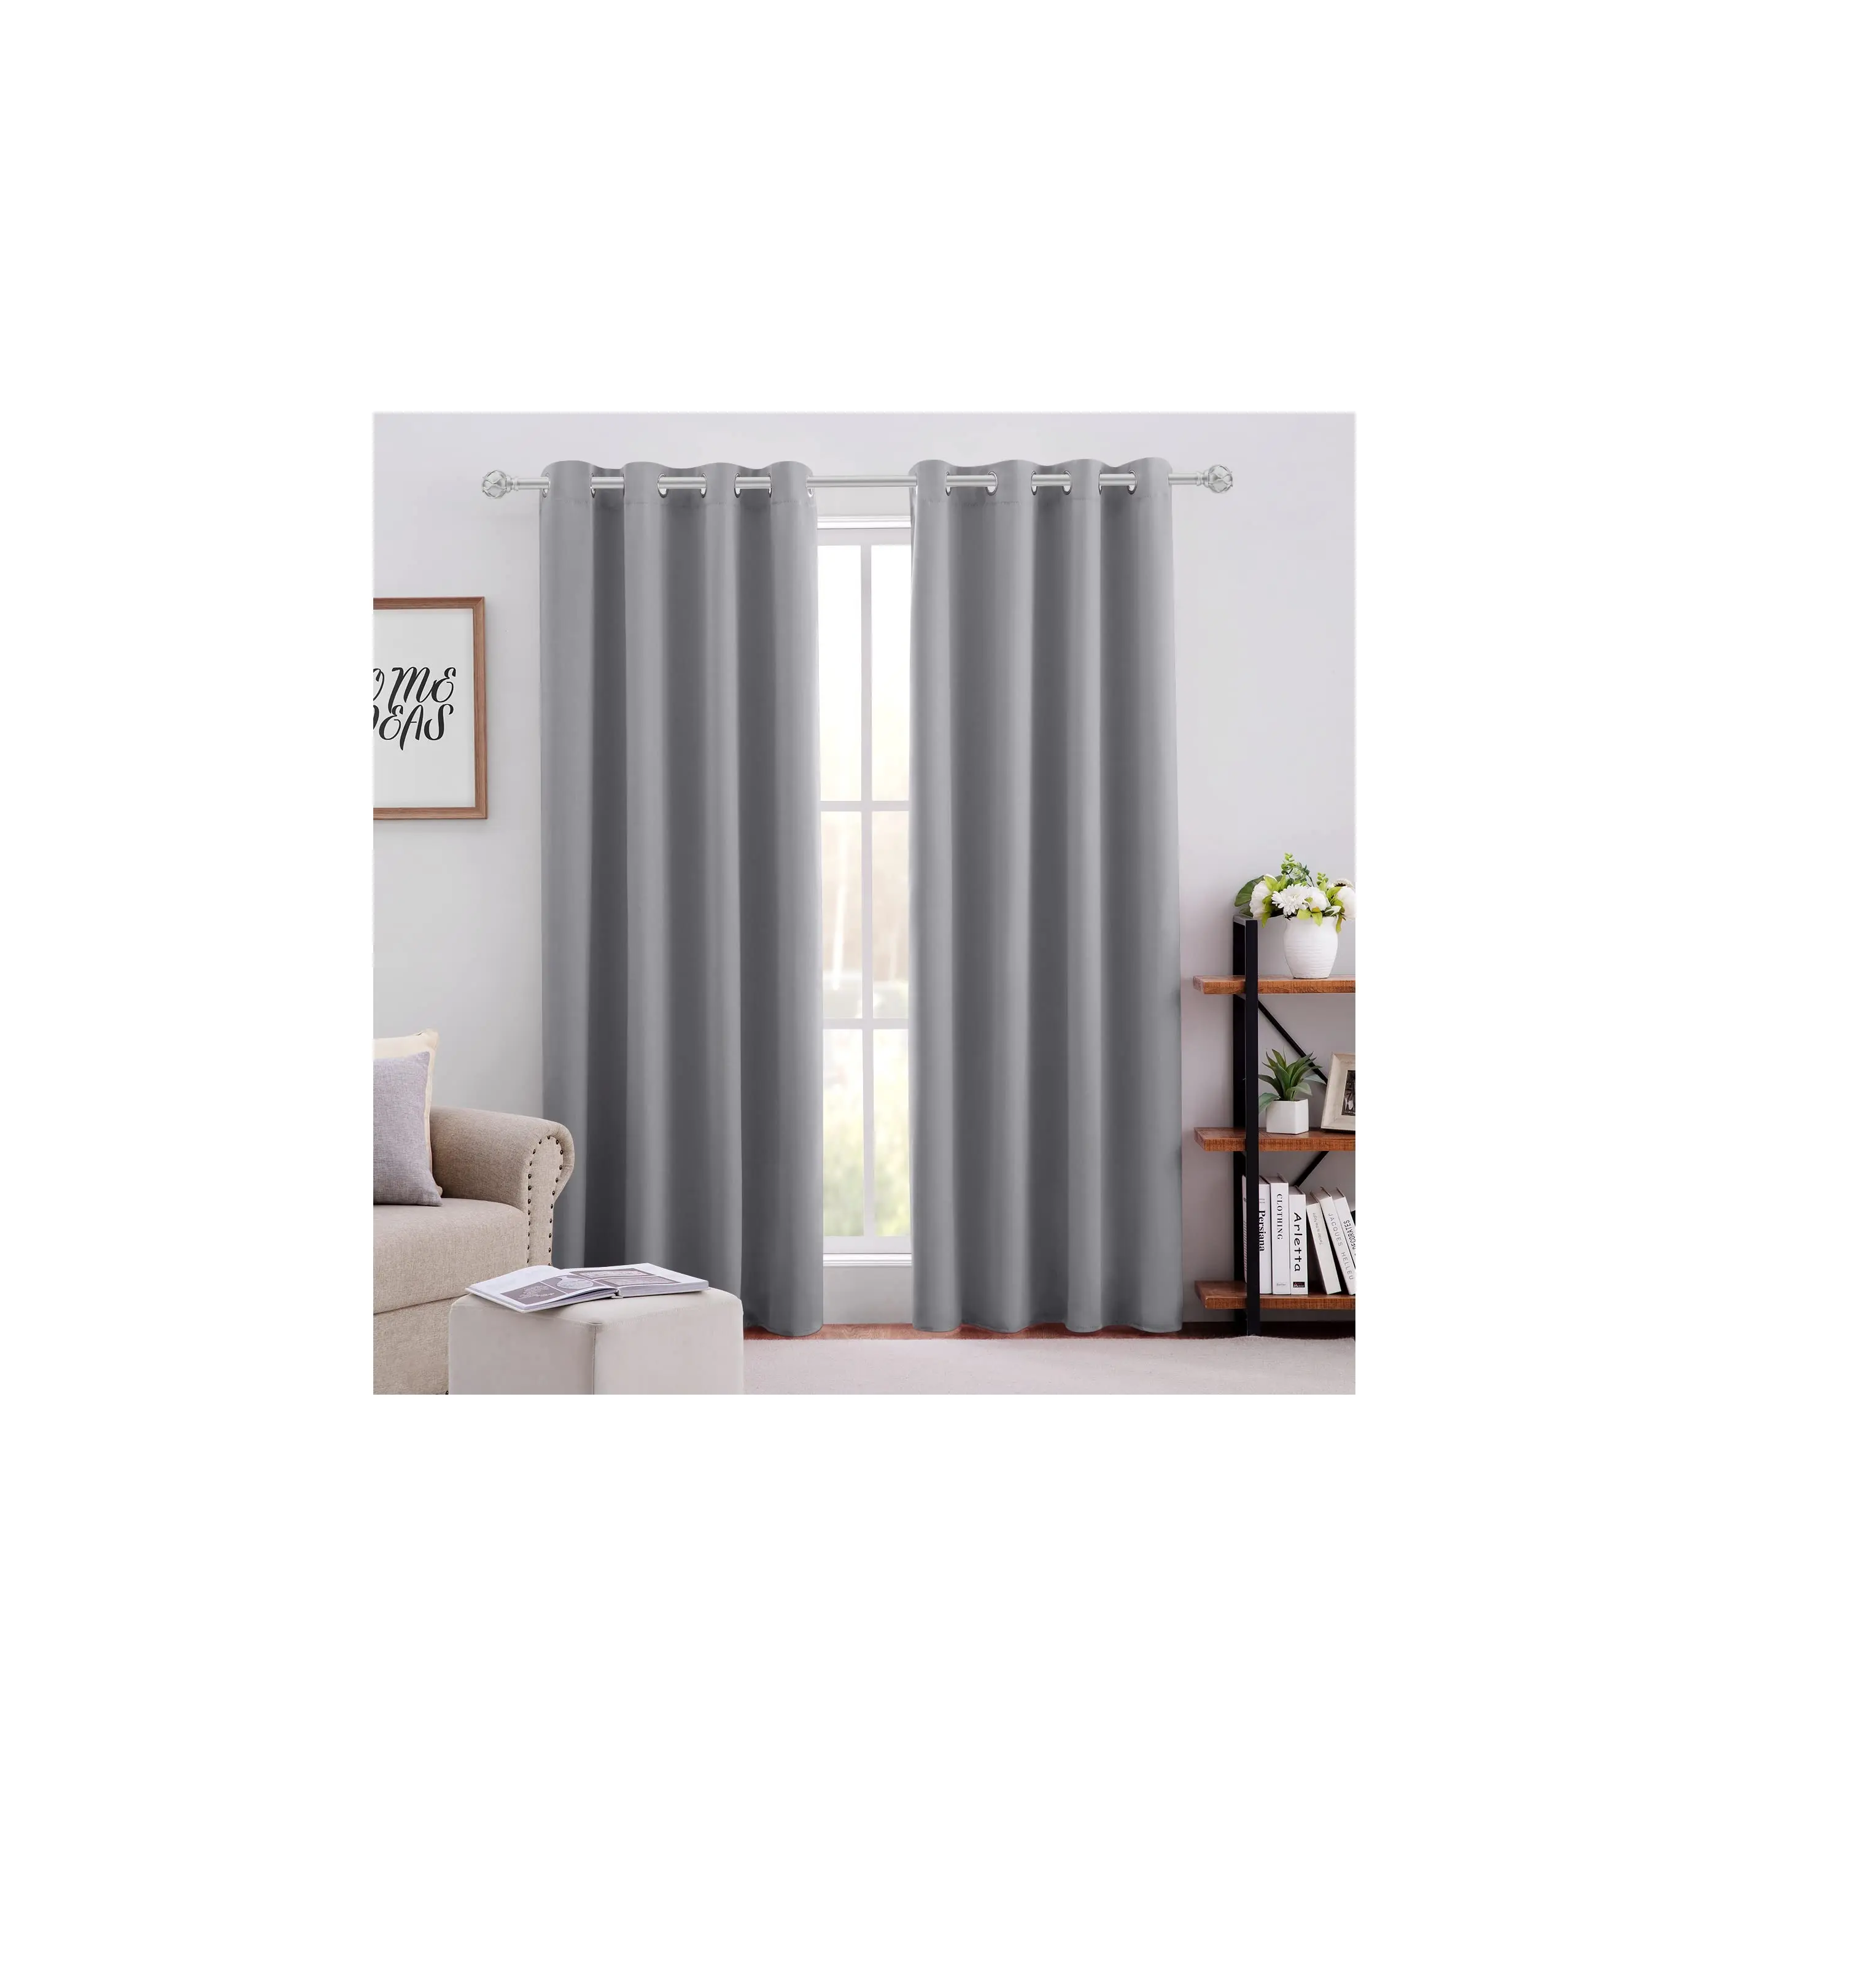 Factory supplier Readymade design Product Waterproof window Curtains Solid Colour Curtains for living room from India